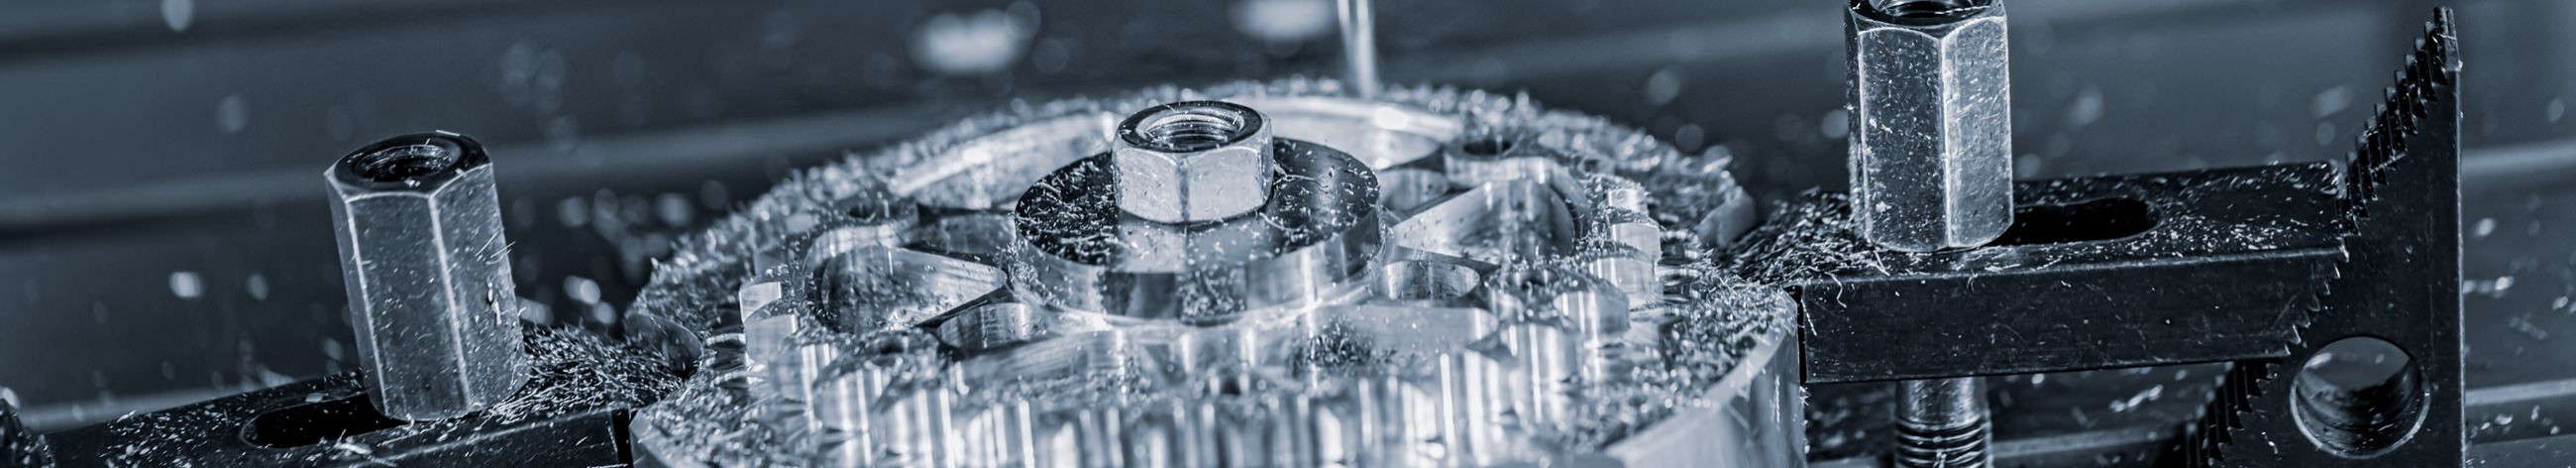 We offer expert CNC milling and lathe processing services to transform raw materials into high-quality components.